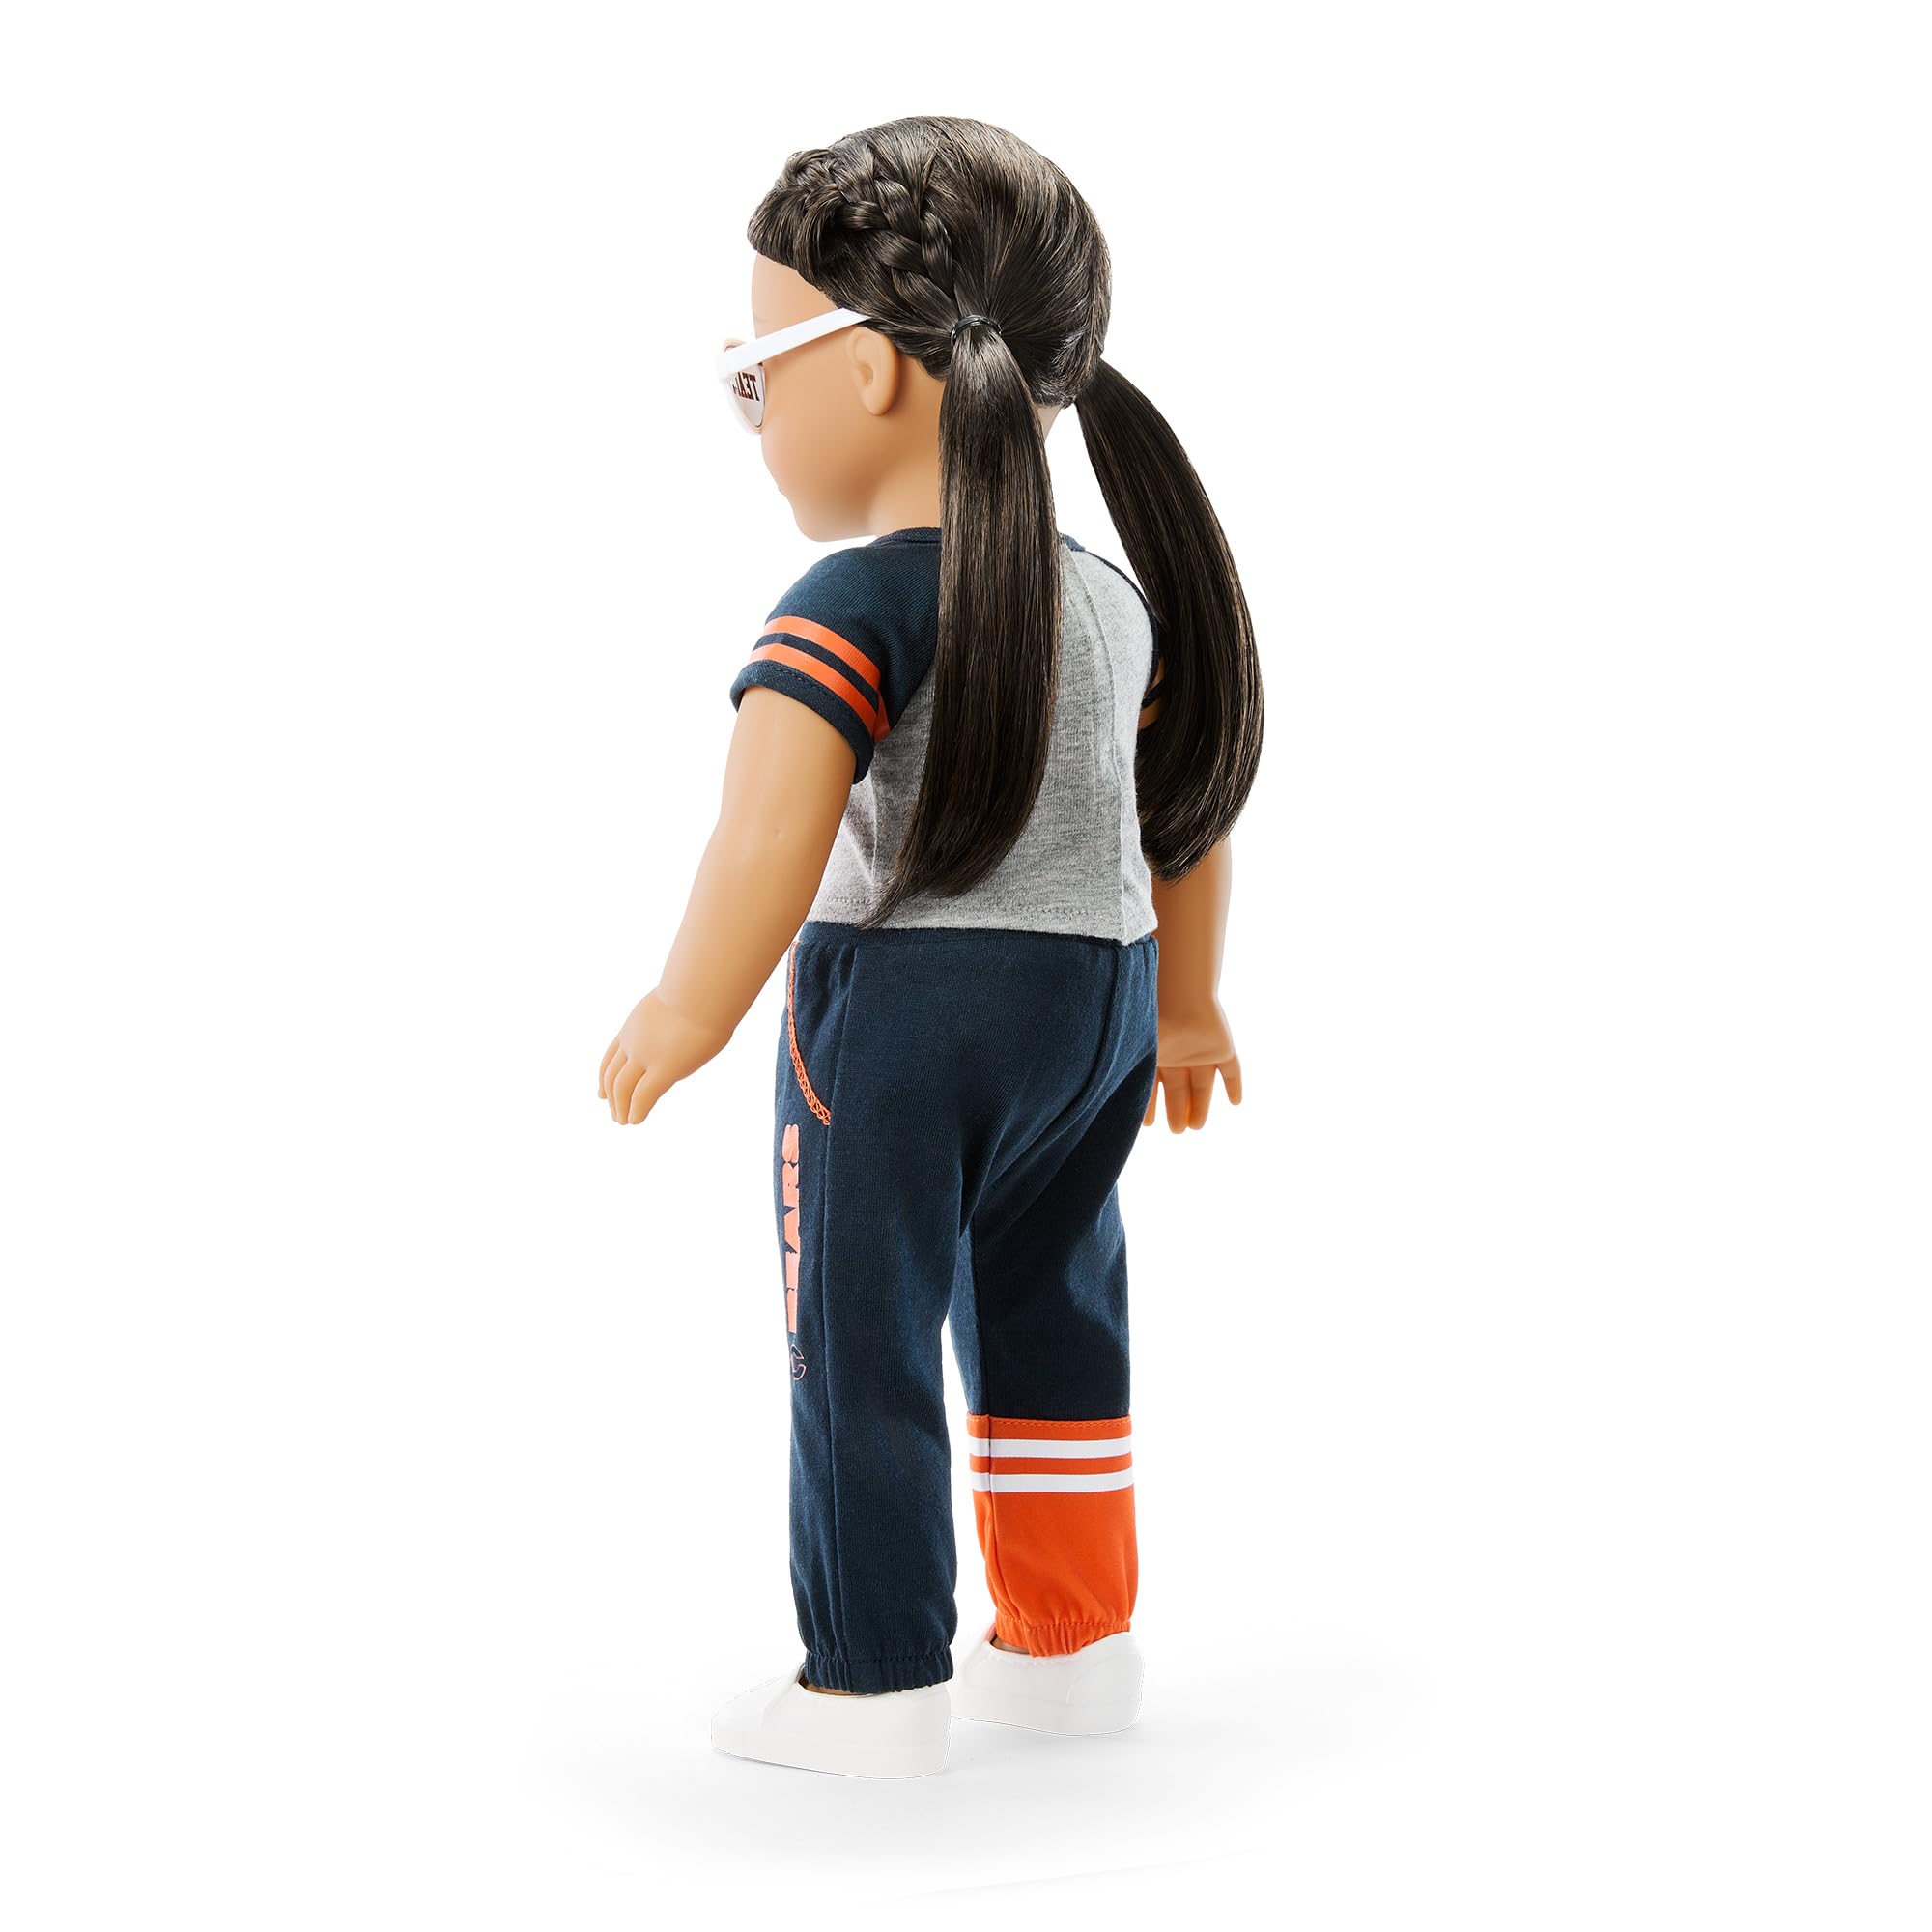 American Girl Chicago Bears 18 inch Doll Fan Outfit and Accessories, Navy and Orange, 6 pcs, Ages 6+